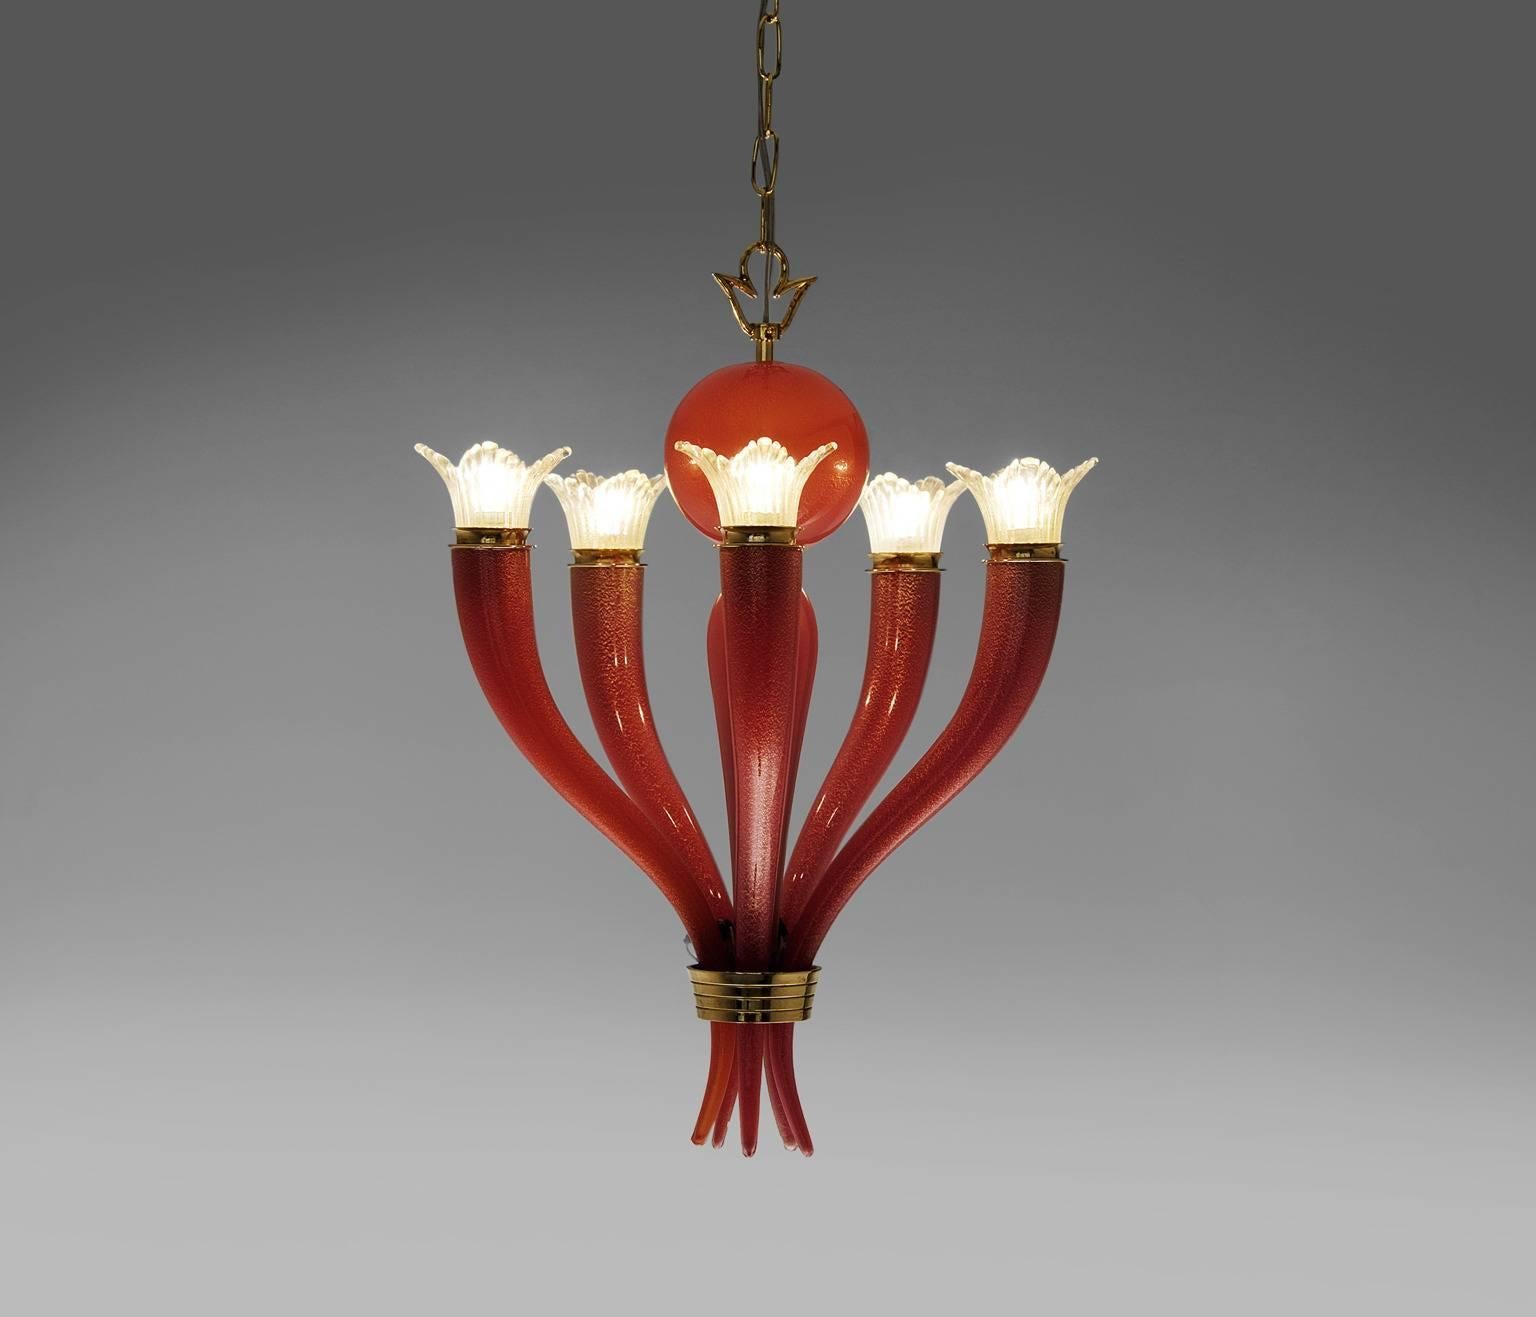 Chandelier, in Murano glass and brass, by Tomaso Buzzi for Venini, Italy 1930s.

This handblown glass pendant truly is spectacular. The five Horn shaped elements are very elegant and well proportioned. The smooth curves in red glass are mounted